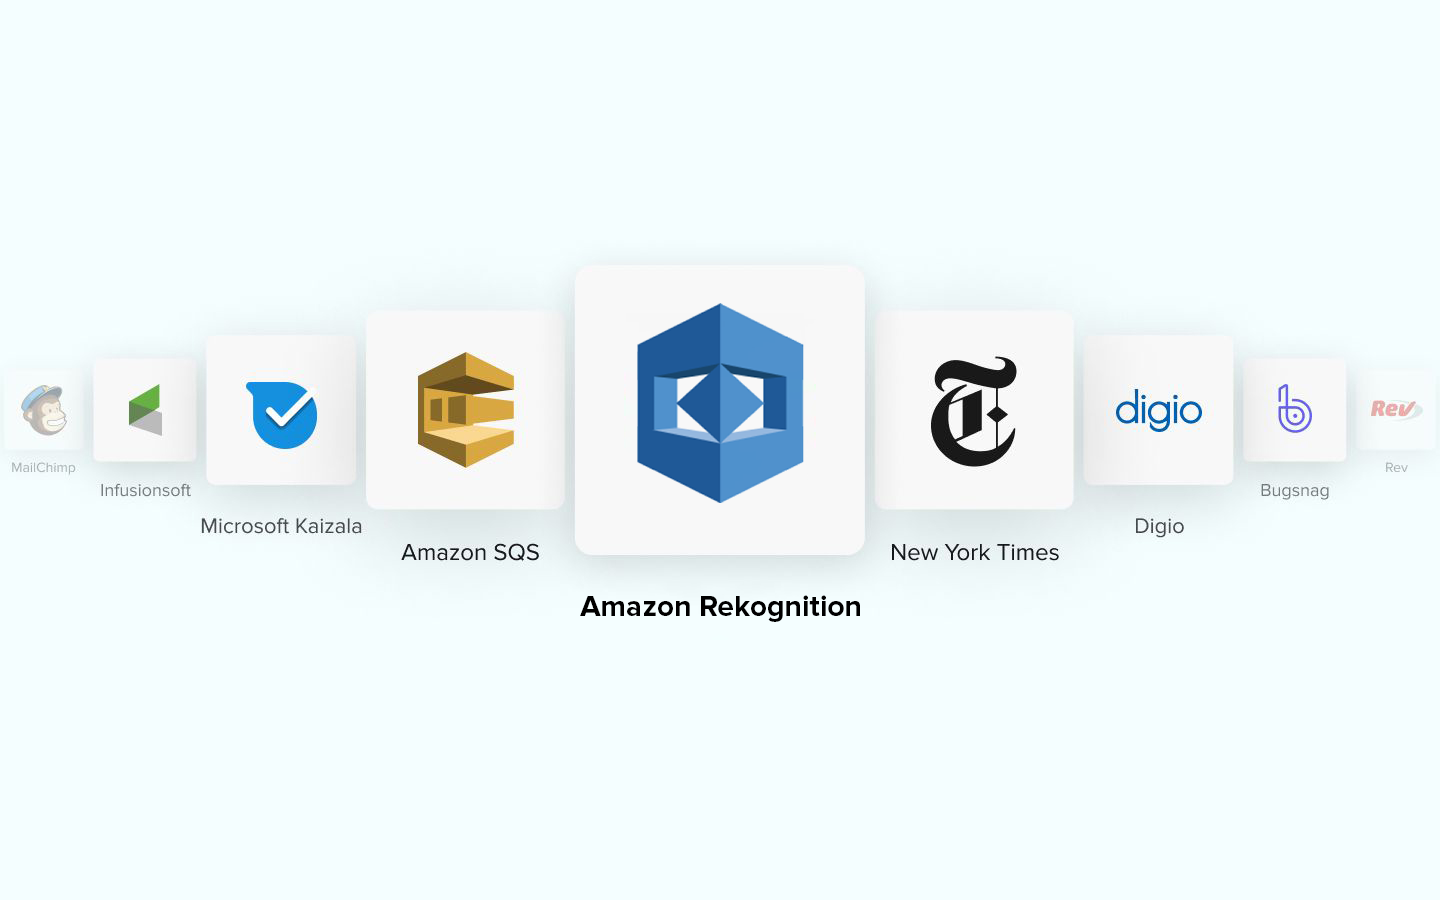 Amazon Rekognition – Detect and Analyze The Objects With Ease